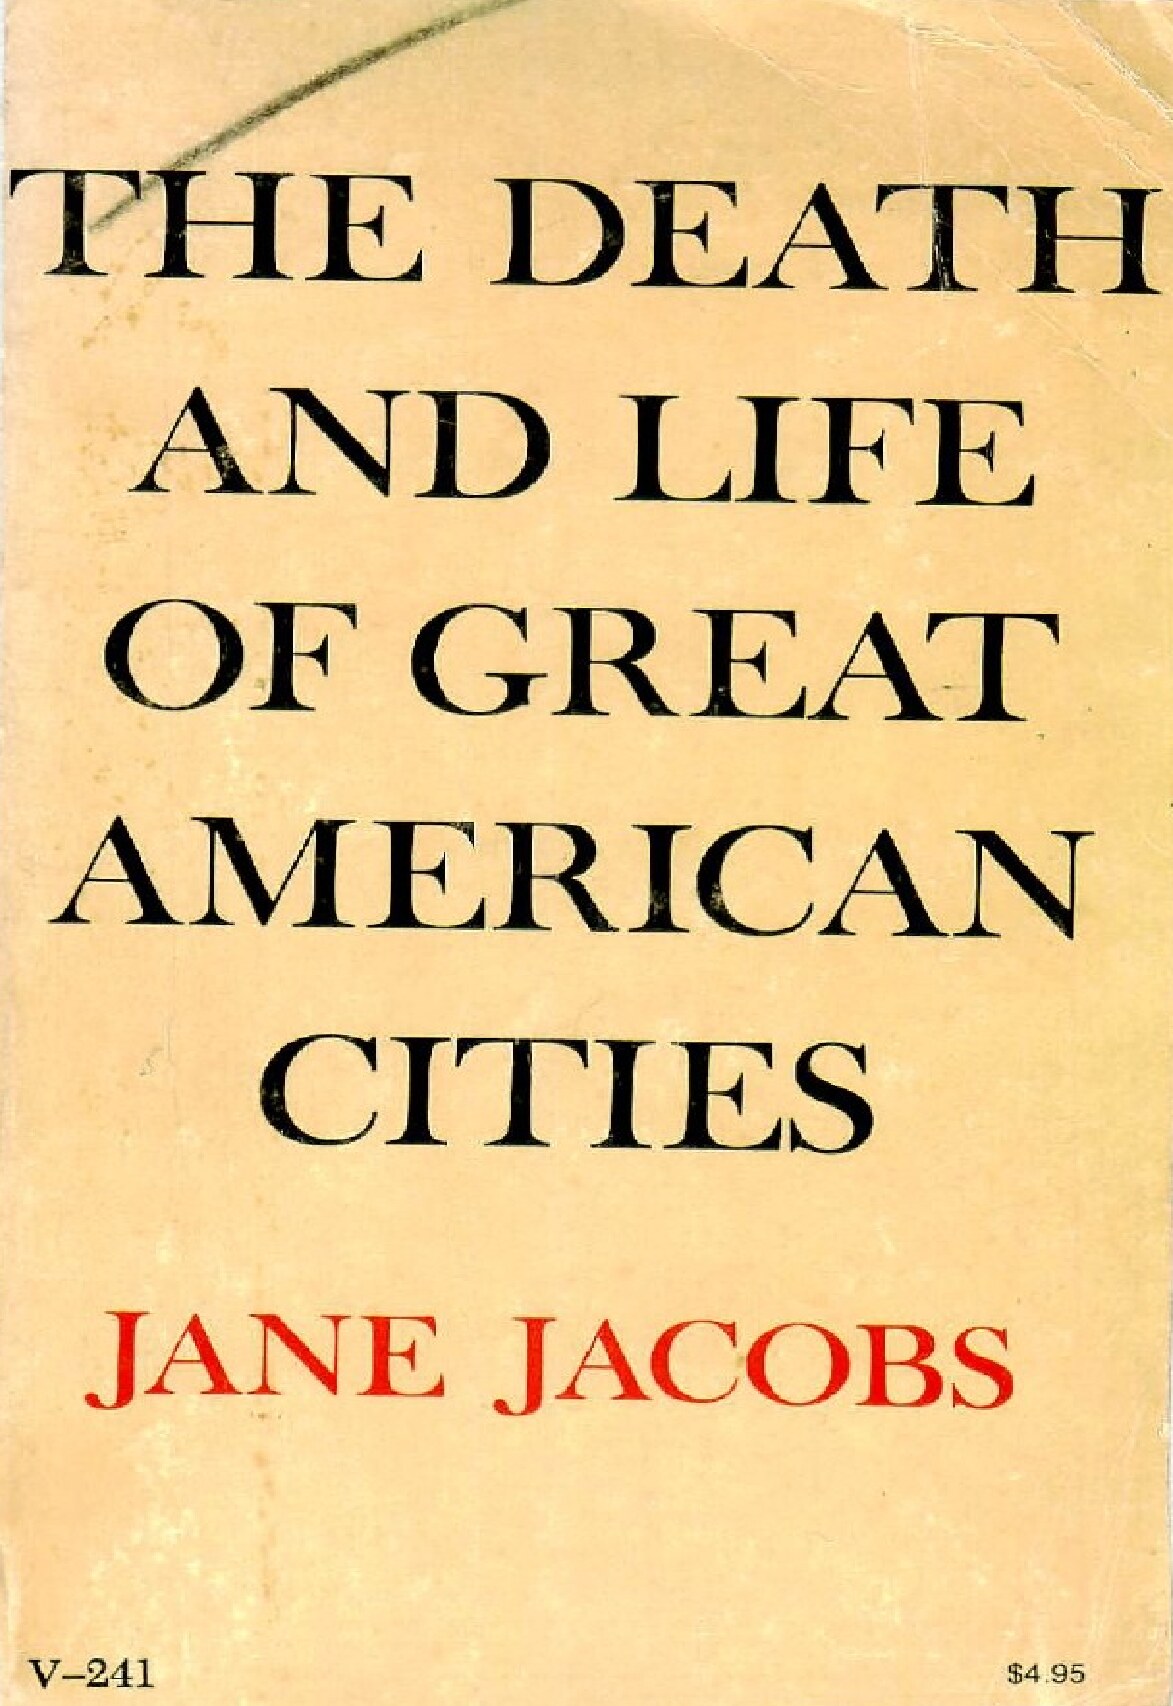 Jane Jacobs-The Death and Life of Great American Cities (2)